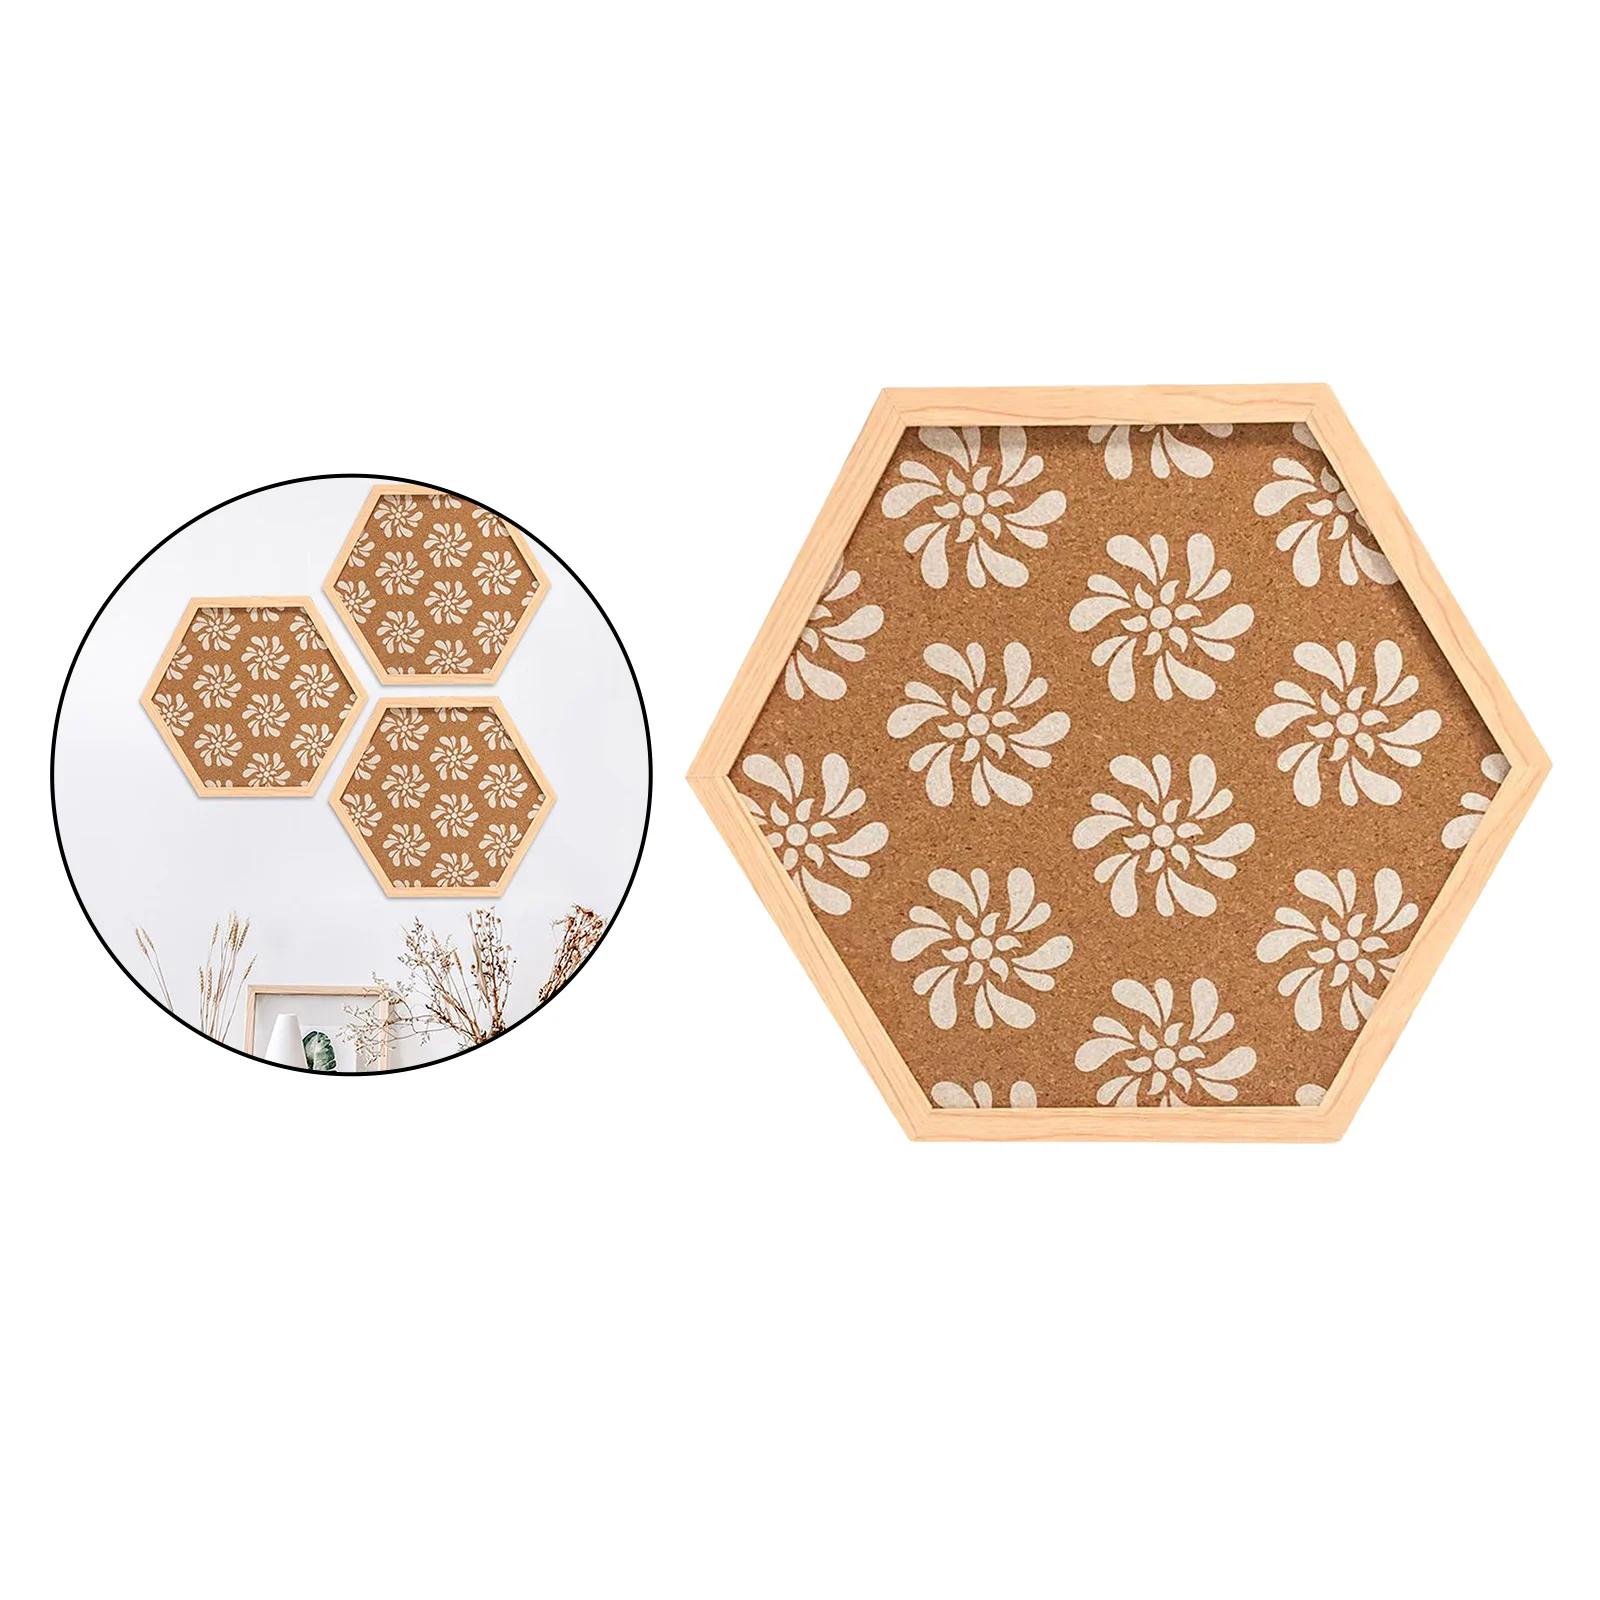 Cork Bulletin Boards - Hexagonal Decorative Tiles - Perfect Pinning Reminders in Your Kitchen, Office School Classroom Home Room